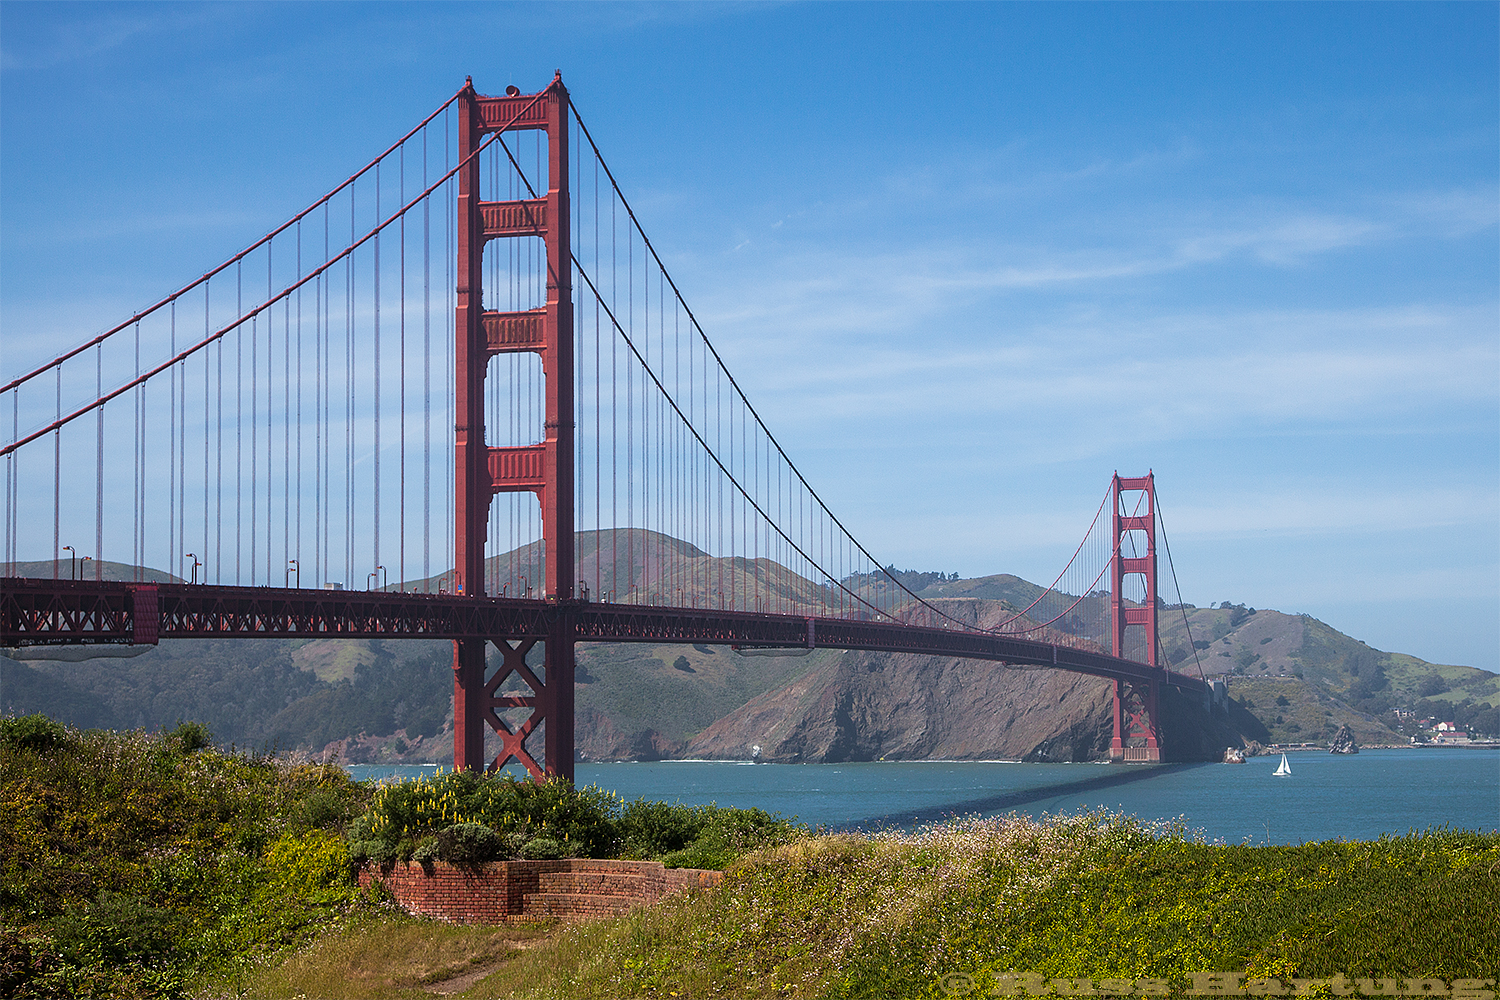 Golden Gate Bridge - San Francisco. The iron ore to build this bridge came from the mines at Lyon Mountain and was also used in the Brooklyn Bridge, and the George Washington Bridge.